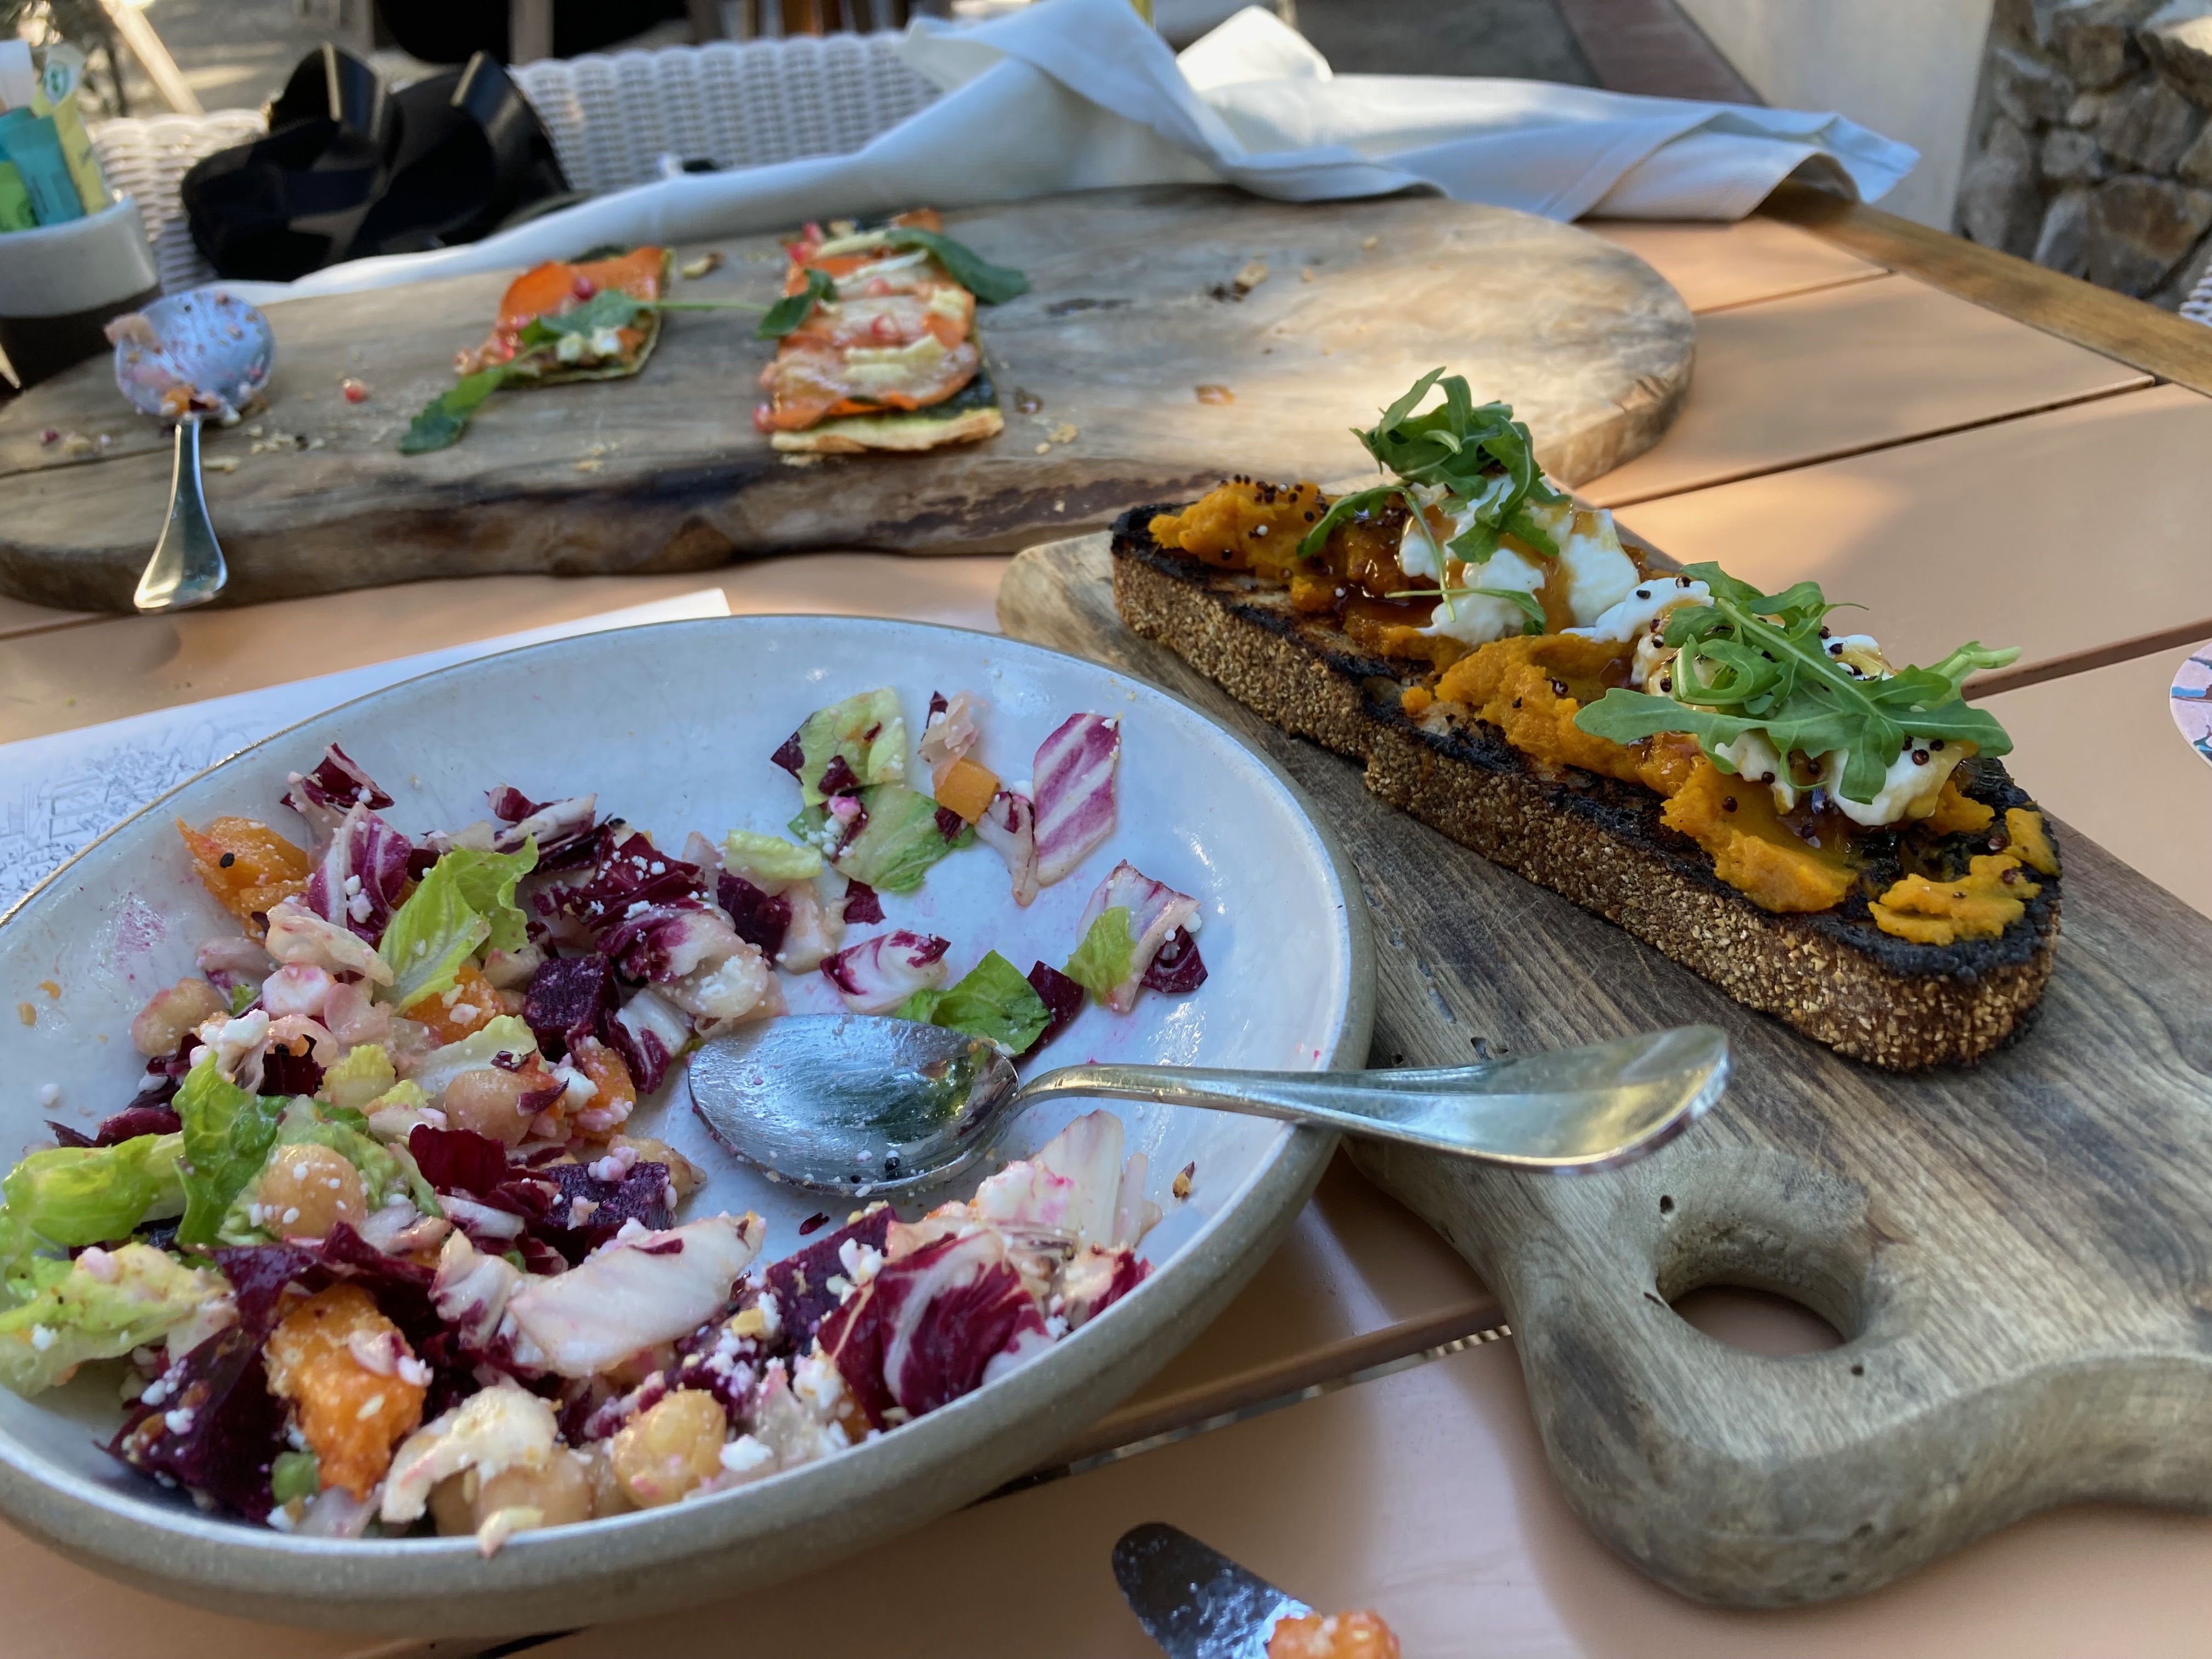 Image of a lovely lunch. A mixed salad in a white bowl. A tartine and a pizza both served on rustic cutting boards. In an outdoor setting with filtered dappled light.